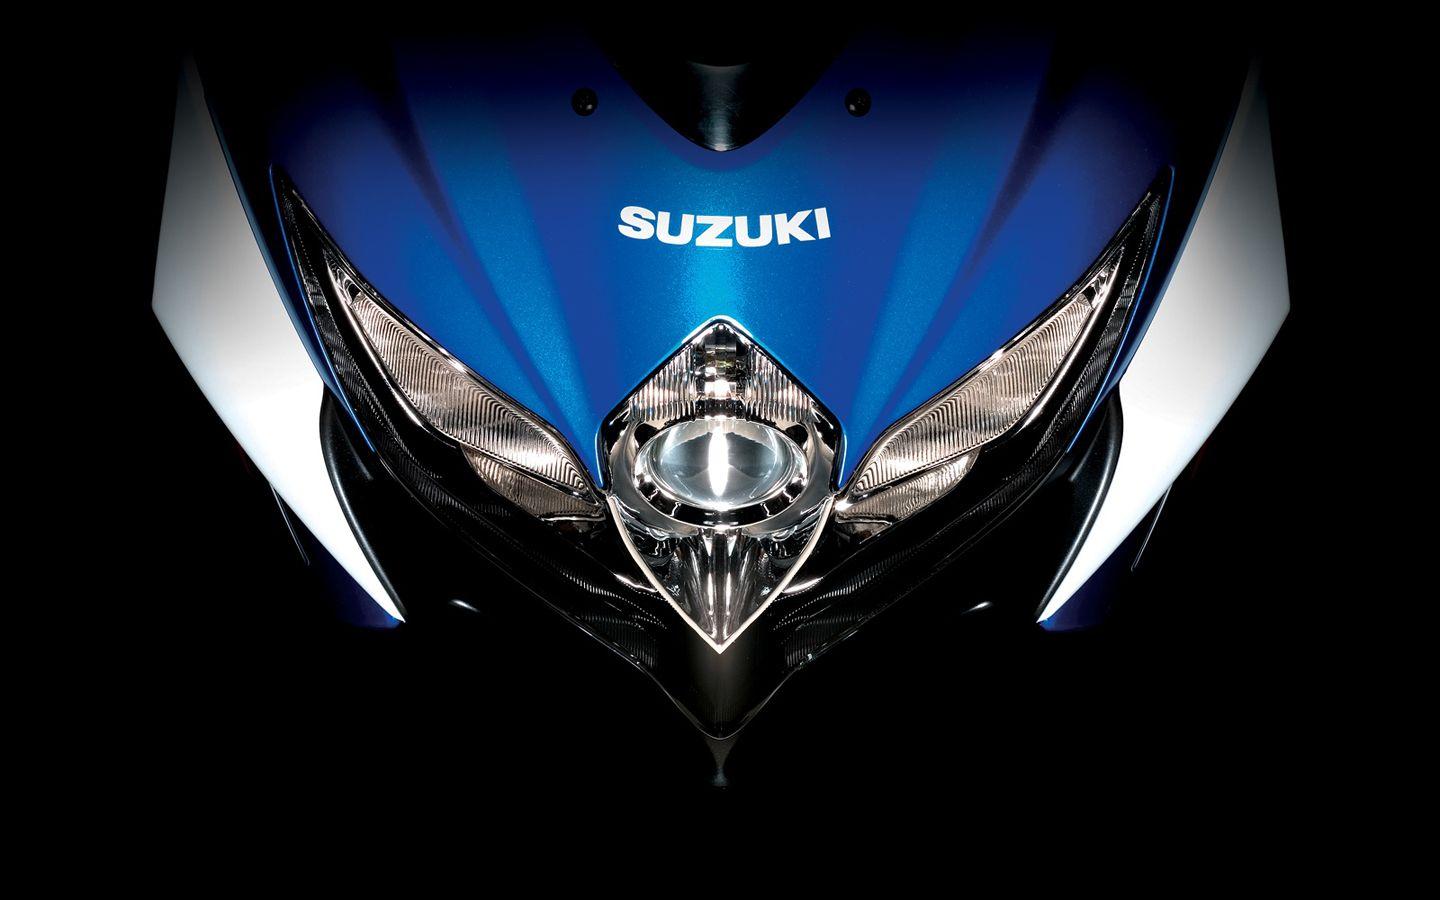 Download the GSXR Face Wallpaper, GSXR Face iPhone Wallpaper, GSXR